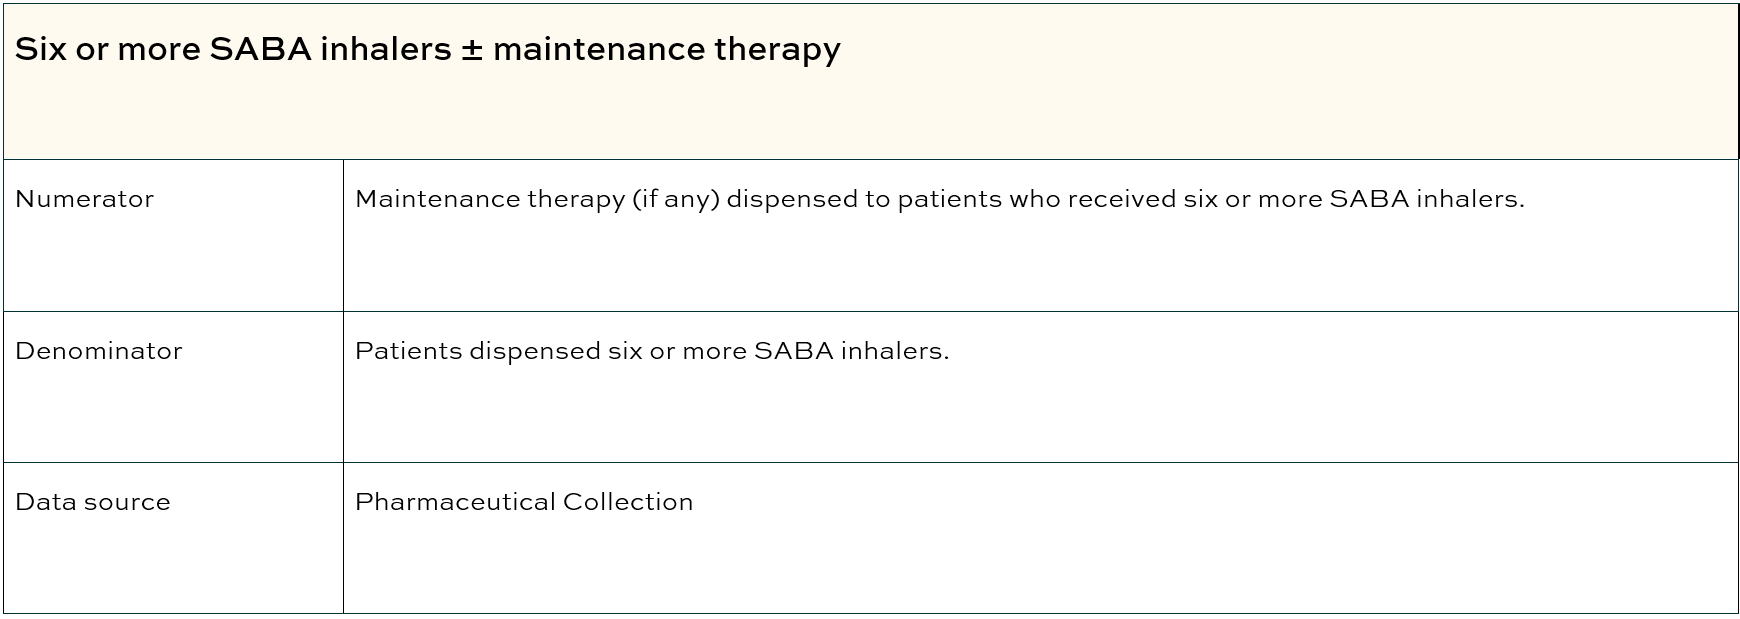 Six or more SABA inhalers and maintenance therapy table